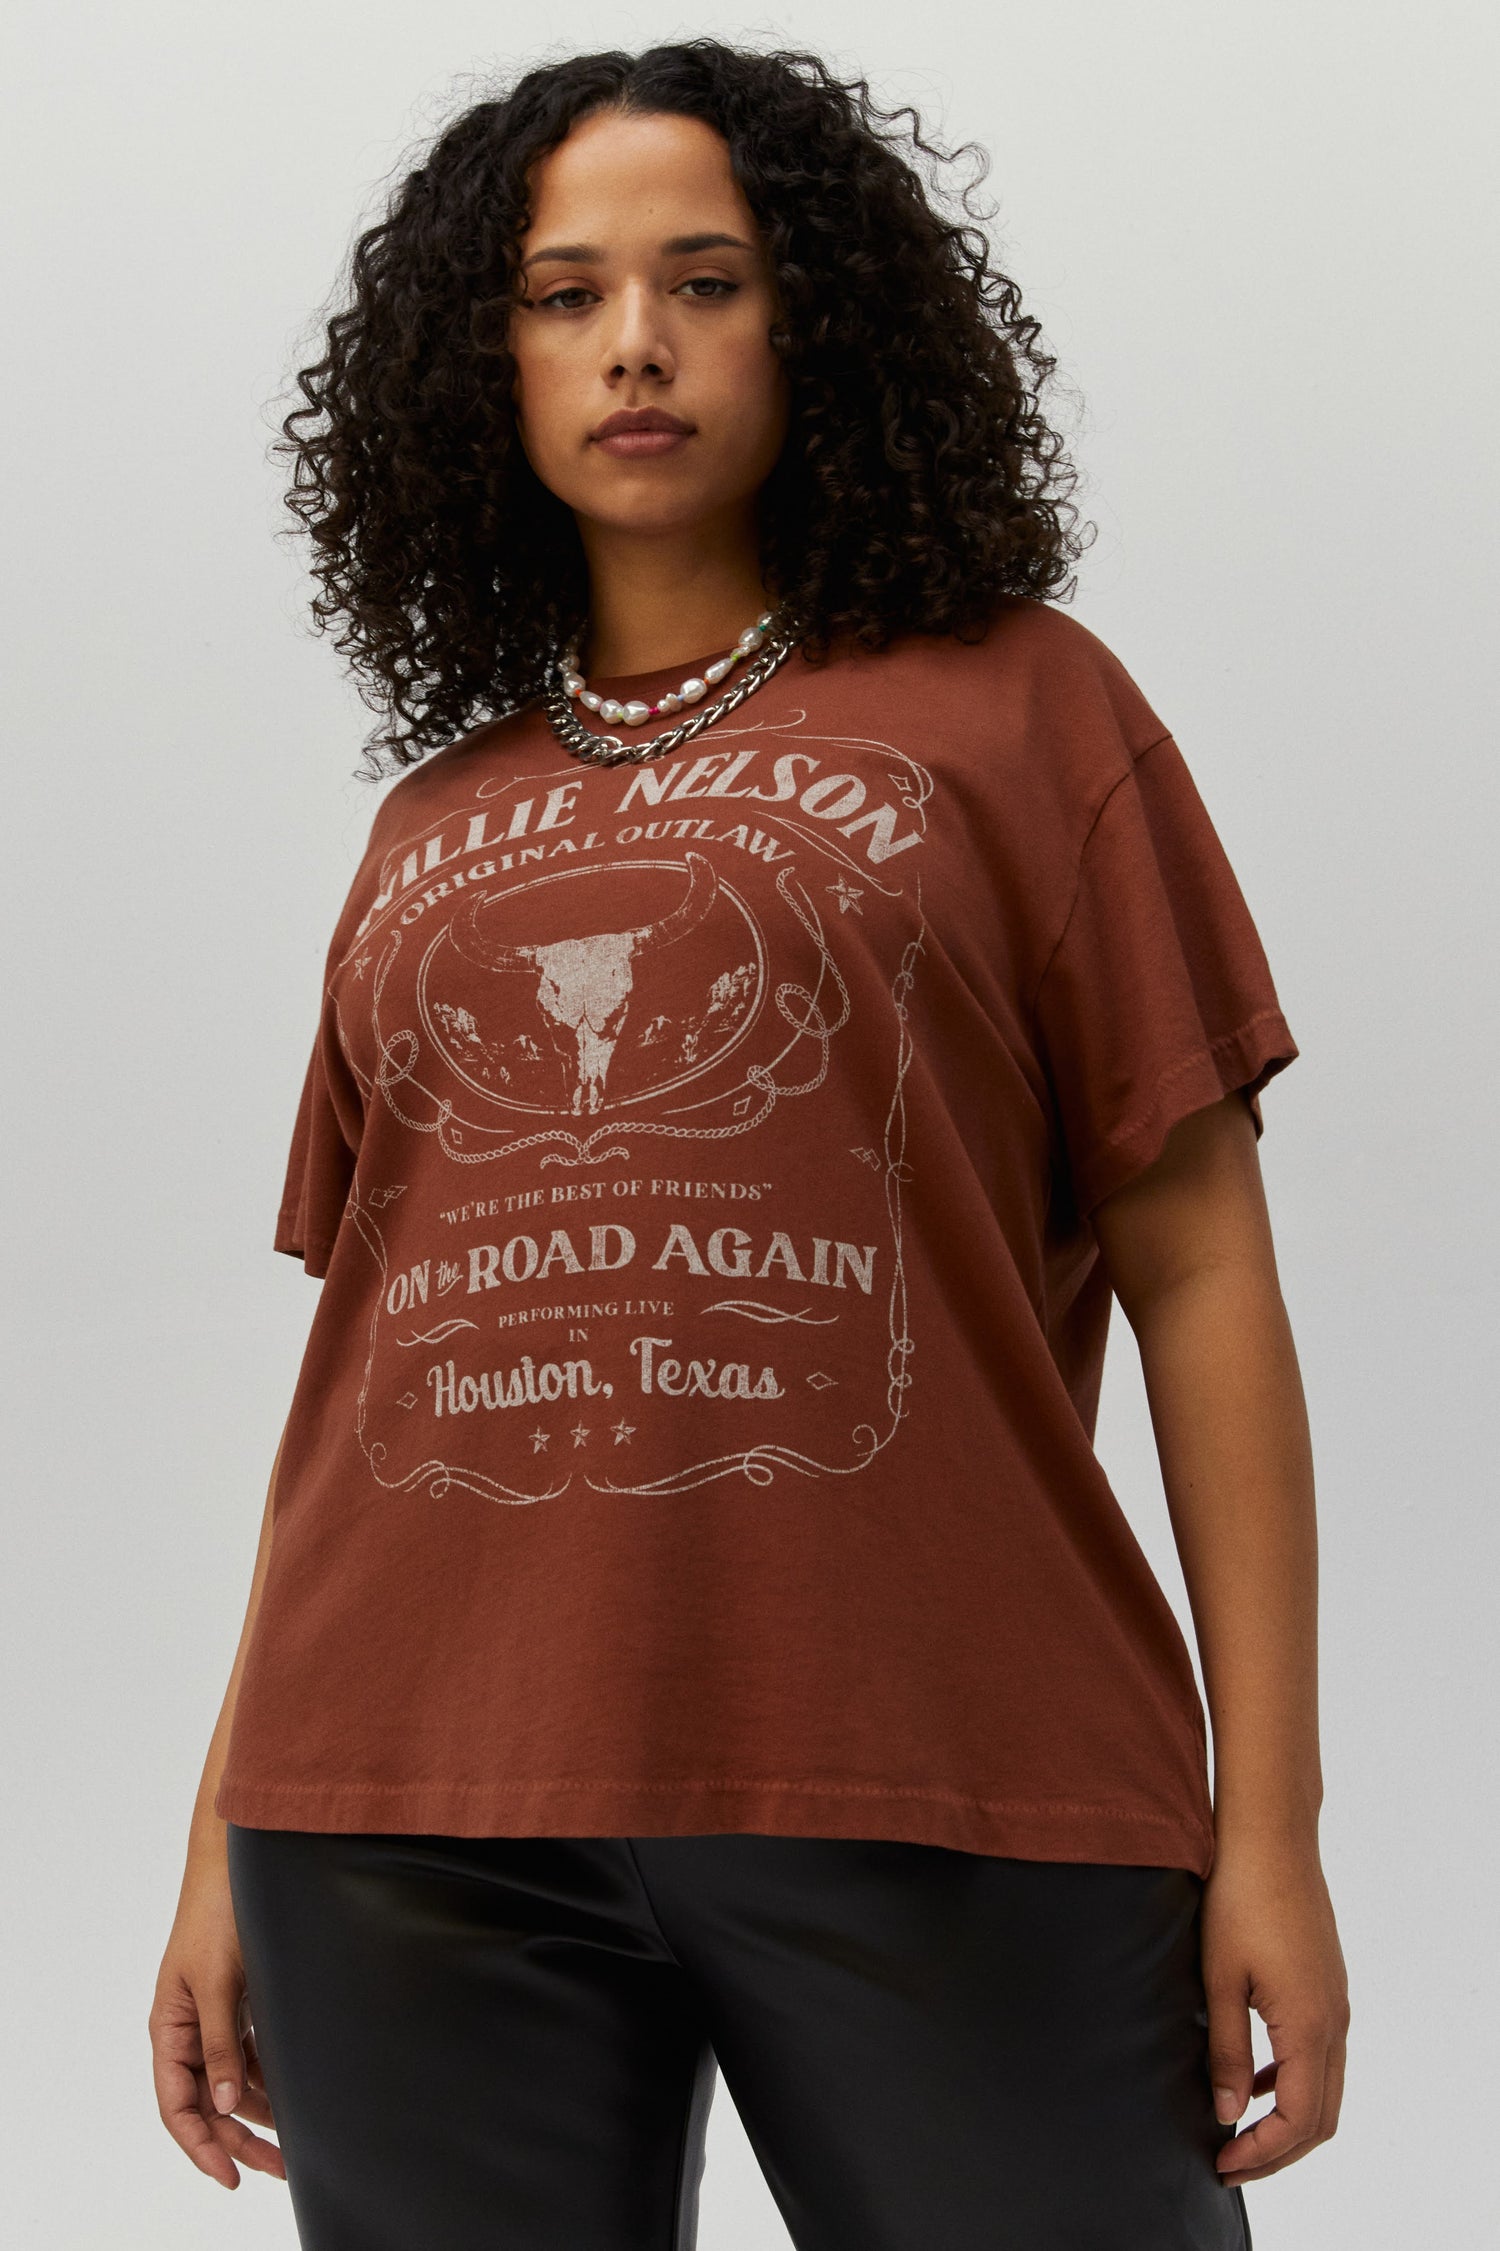 Dark curly-haired plus size model featuring a sable tee designed with a stamped lyric from his hit country track “On the Road Again,” this is a true graphic fit to represent the legend who spearheaded the outlaw music movement.